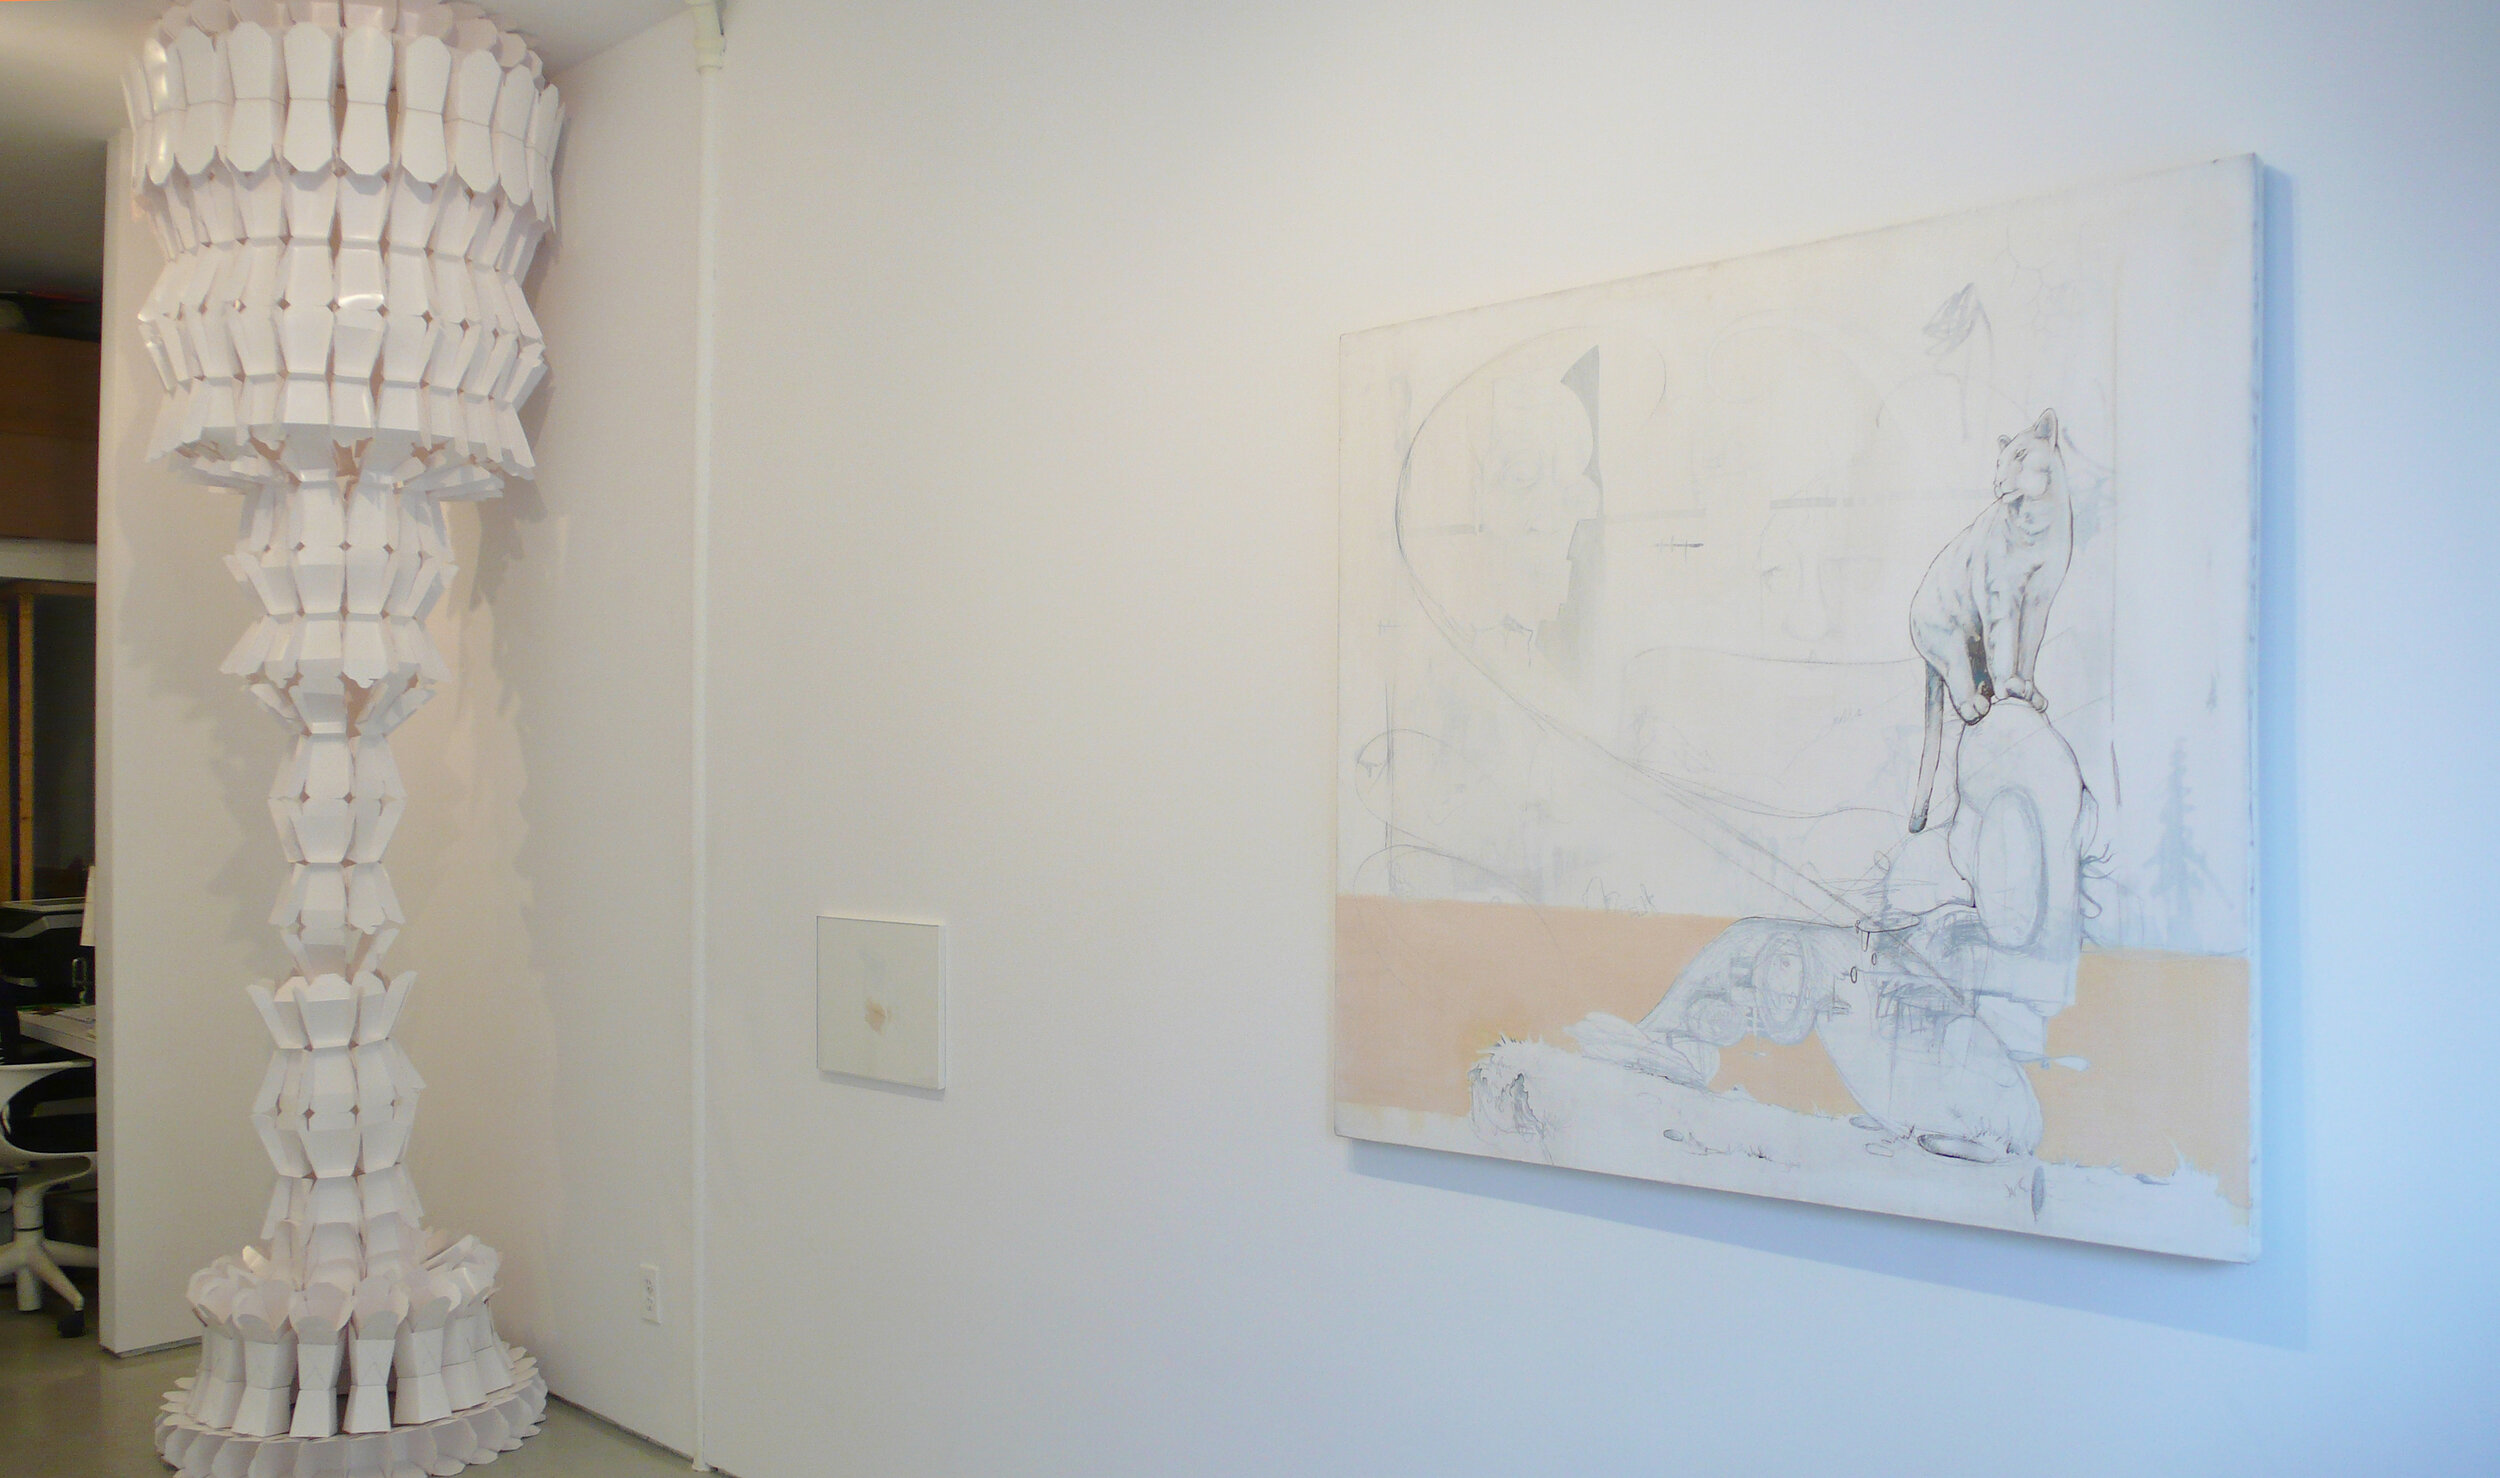 White on White, Curated by Eun Young Choi, featuring works by Boyce Cummings, Larry Lee, Miyeon Lee, K. Min, Jeremiah Teipen, Heeseop Yoon, at Cindy Rucker Gallery